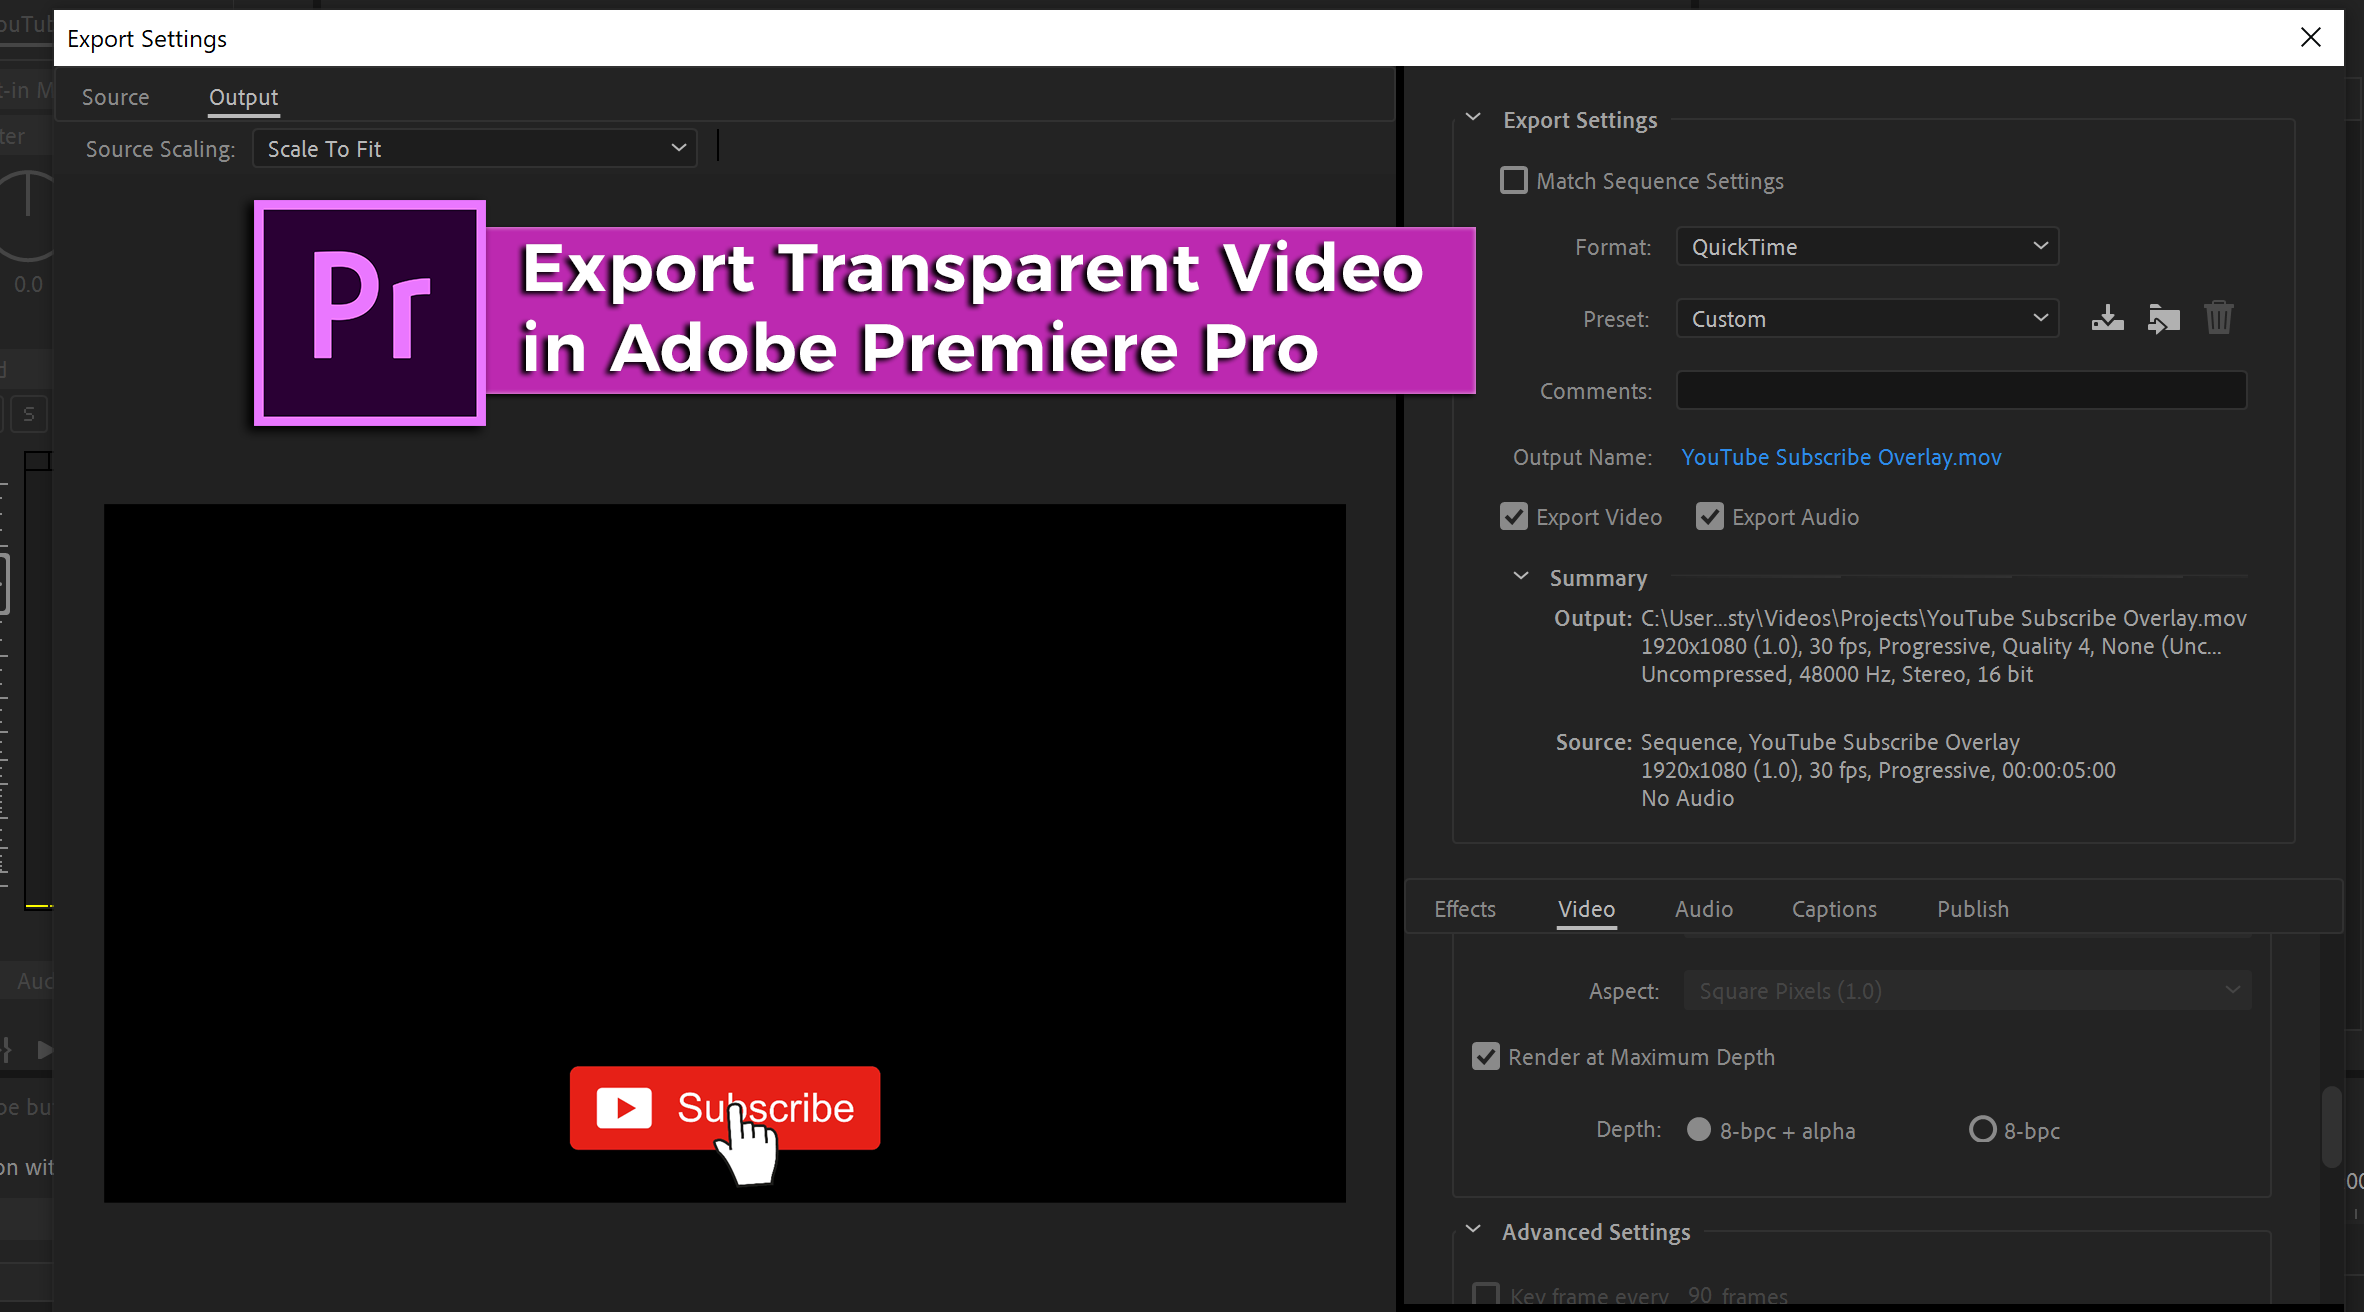 How to export transparent video in Adobe Premiere Pro